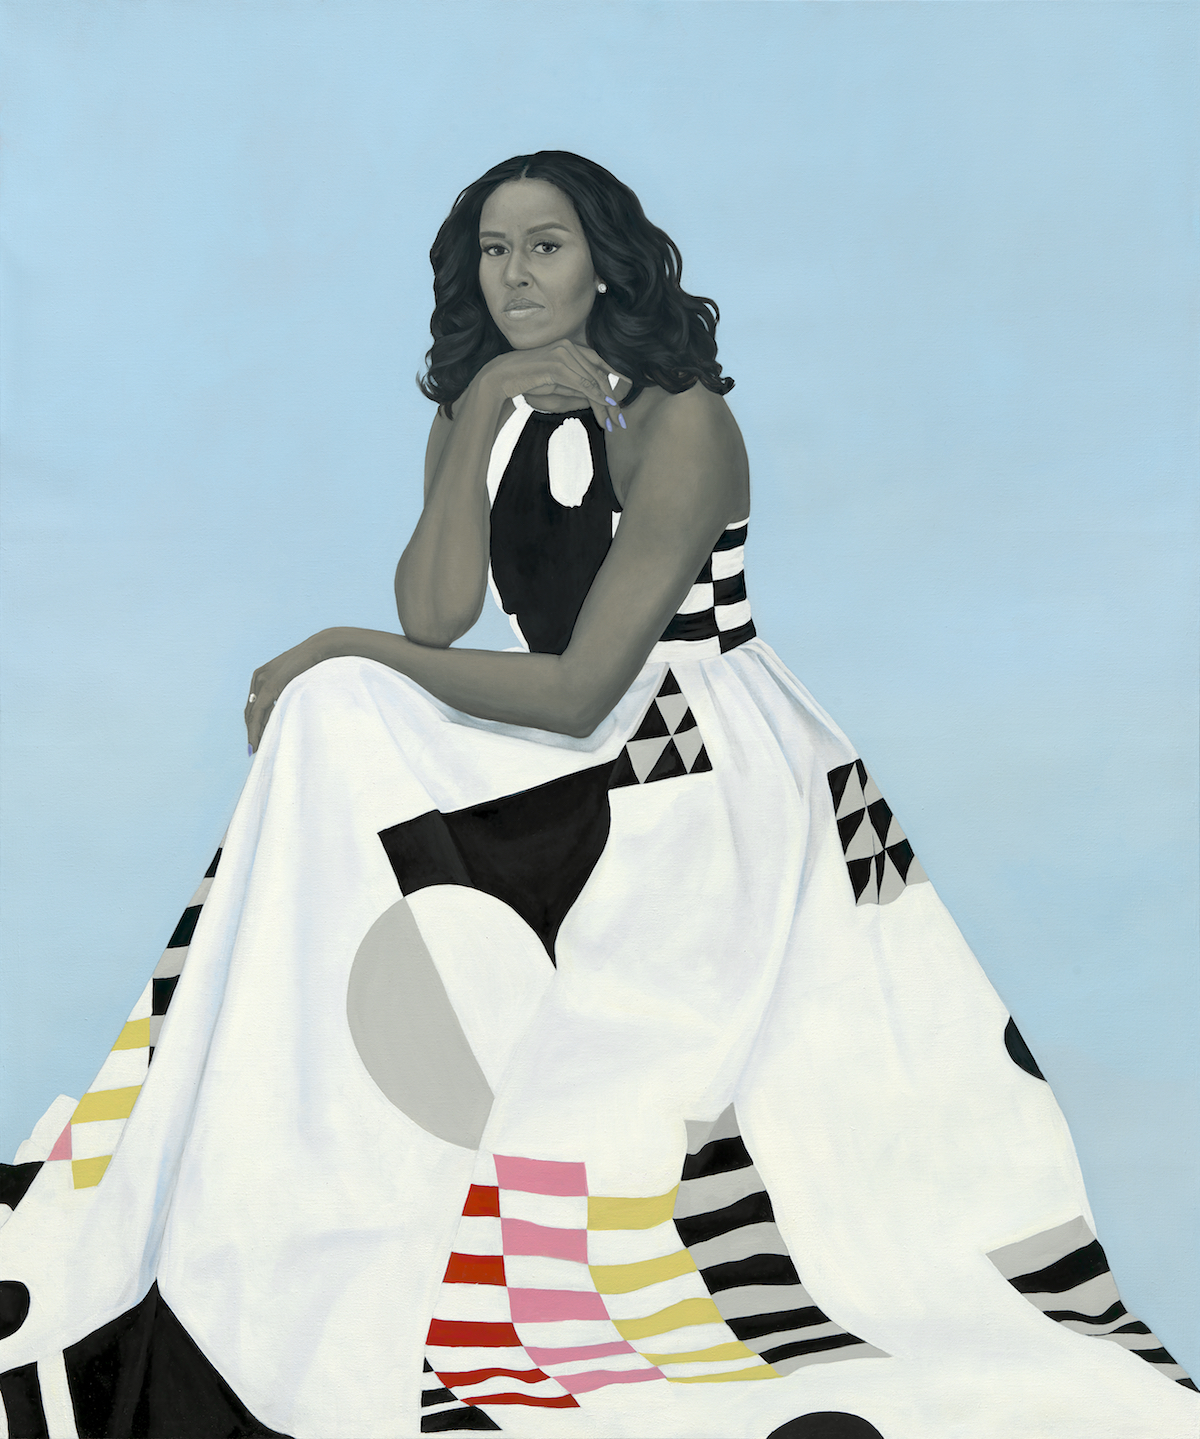 Michelle LaVaughn Robinson Obamaby Amy Sherald, oil on linen, 2018. National Portrait Gallery, Smithsonian Institution. The National Portrait Gallery is grateful to the following lead donors for their support ofthe Obama portraits: Kate Capshaw and Steven Spielberg; Judith Kern and Kent Whealy; Tommie L. Pegues and Donald A. Capoccia.